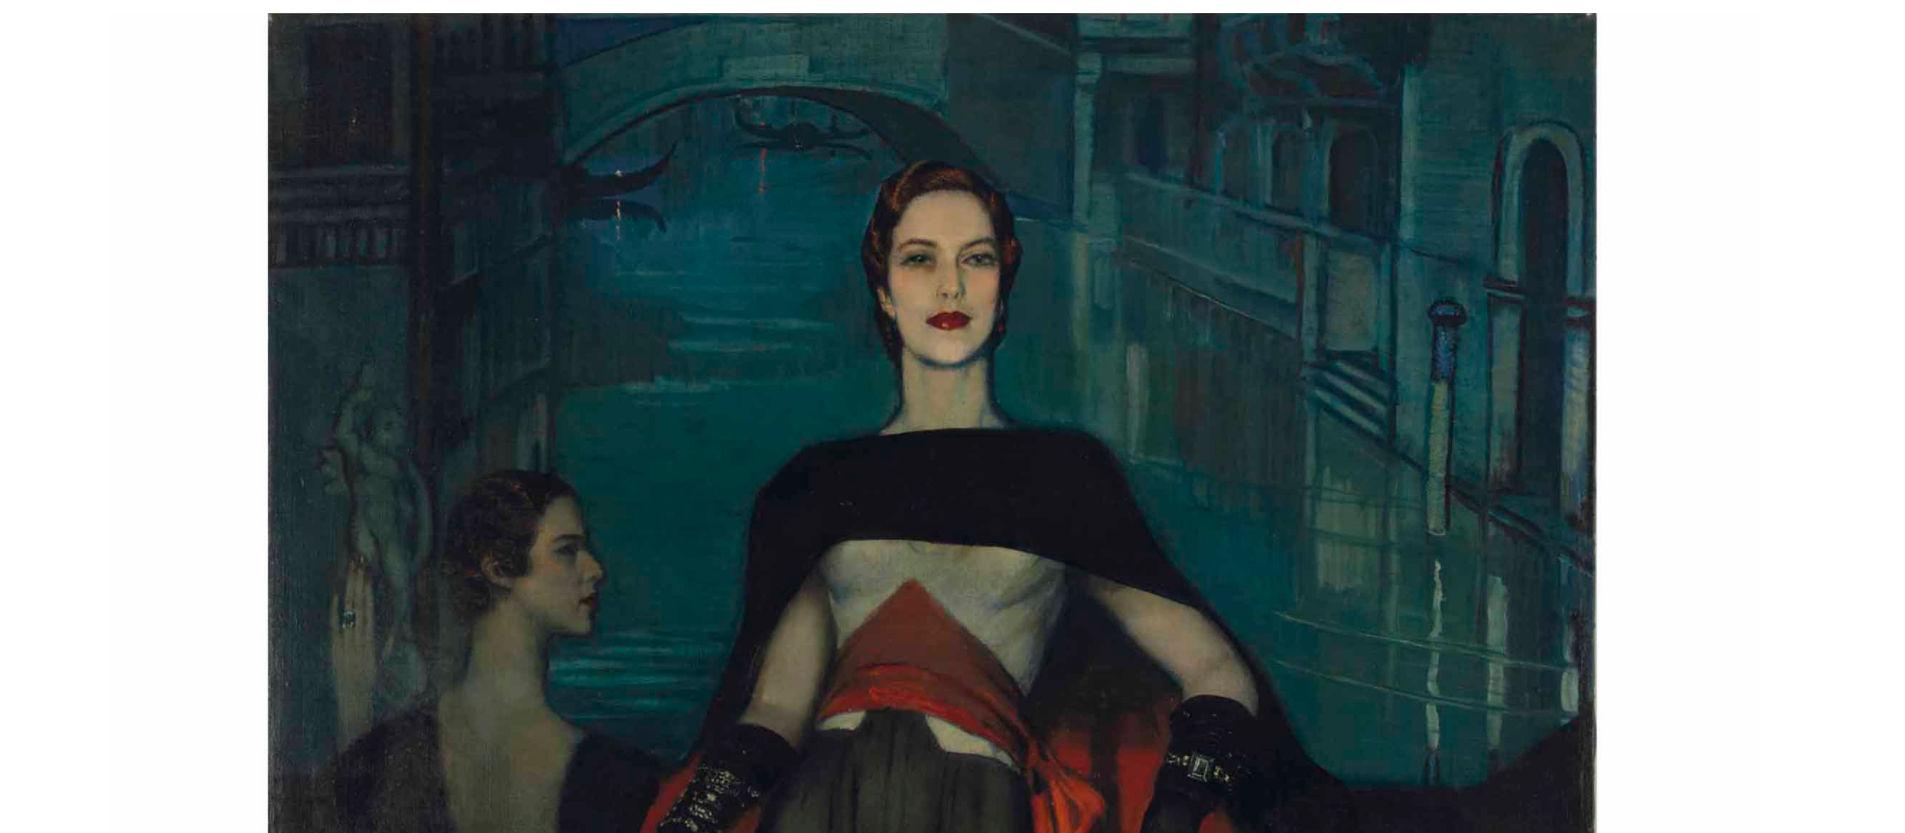 Our very large portrait of Jean Bonnardel (1899-1952), Countess Madeleine de Montgomery, by Federico Armando Beltran Masses (1885-1949) measures 77 3/8 by 52 1/4 in, 196.5 x 132.6 cm. Frame measures 90 by 63 1/2 in; 229 by 161 cm. Signed 'F. Beltran